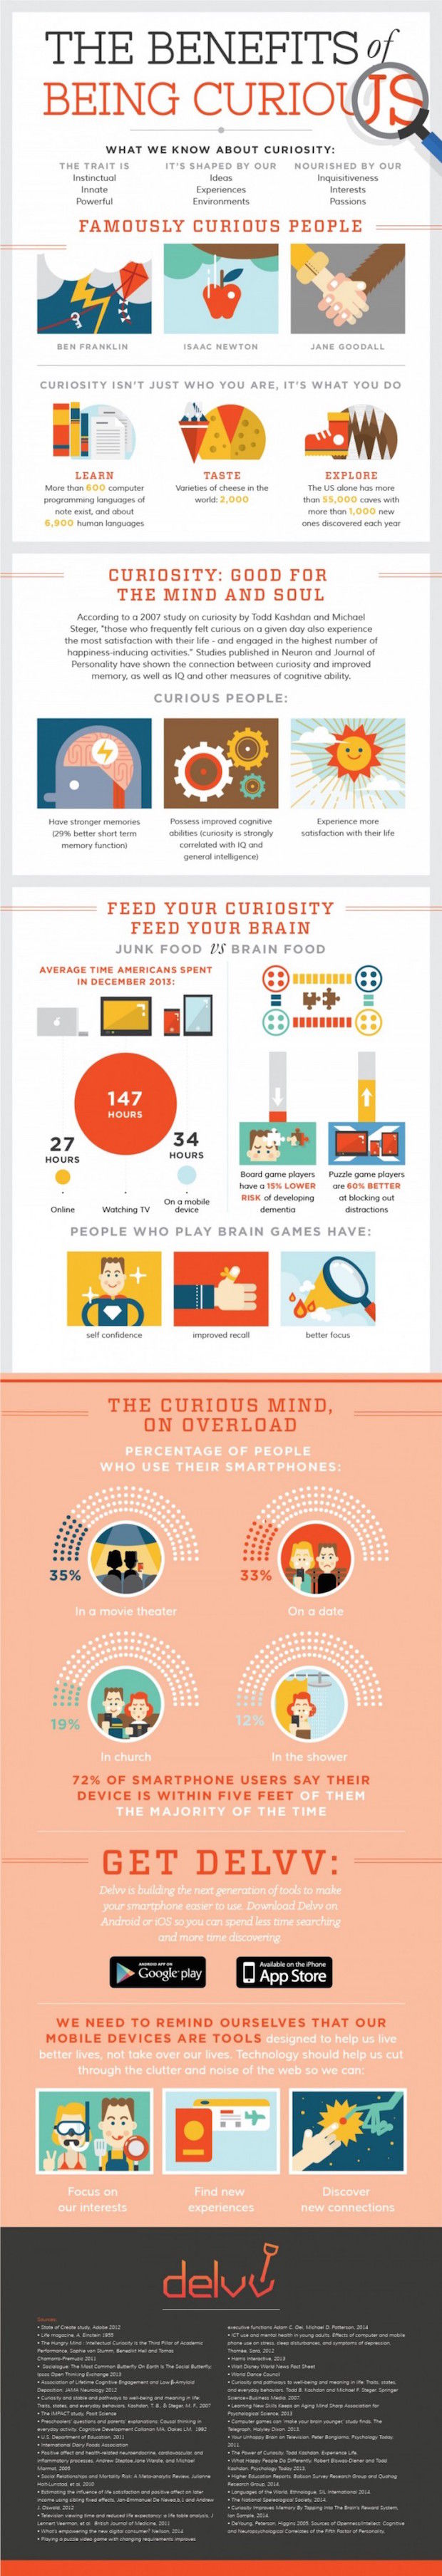 infographic_curious